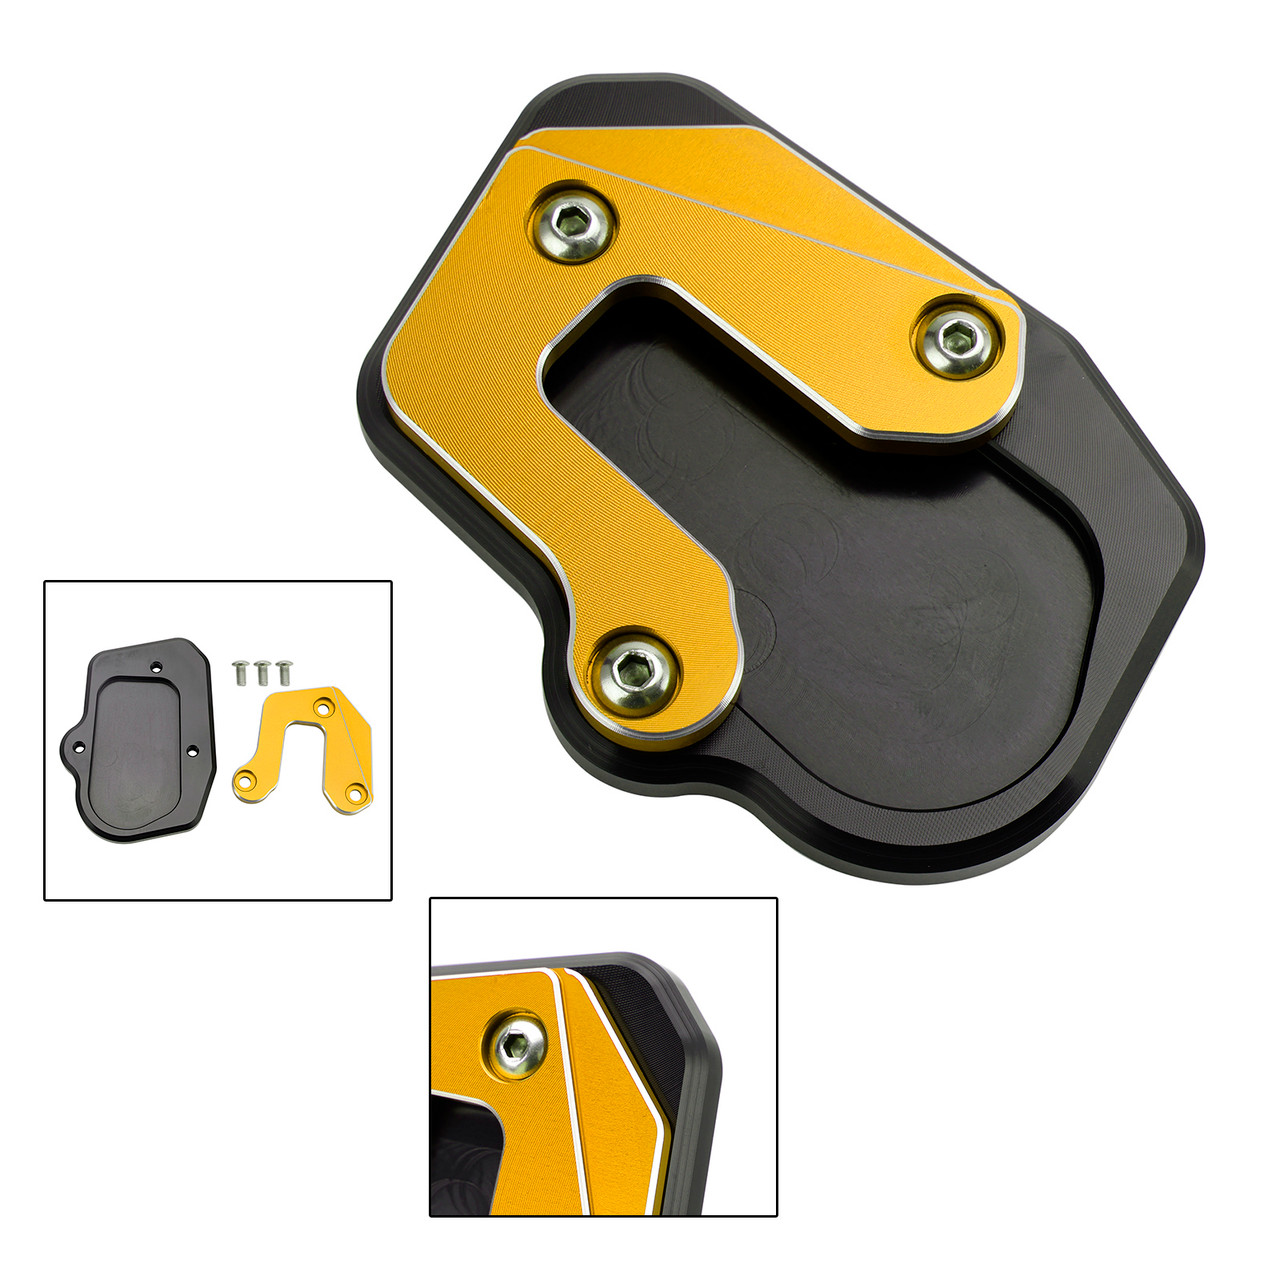 Motorcycle Kickstand Enlarge Plate Pad fit for BMW F900R F900 R 2020 GOLD